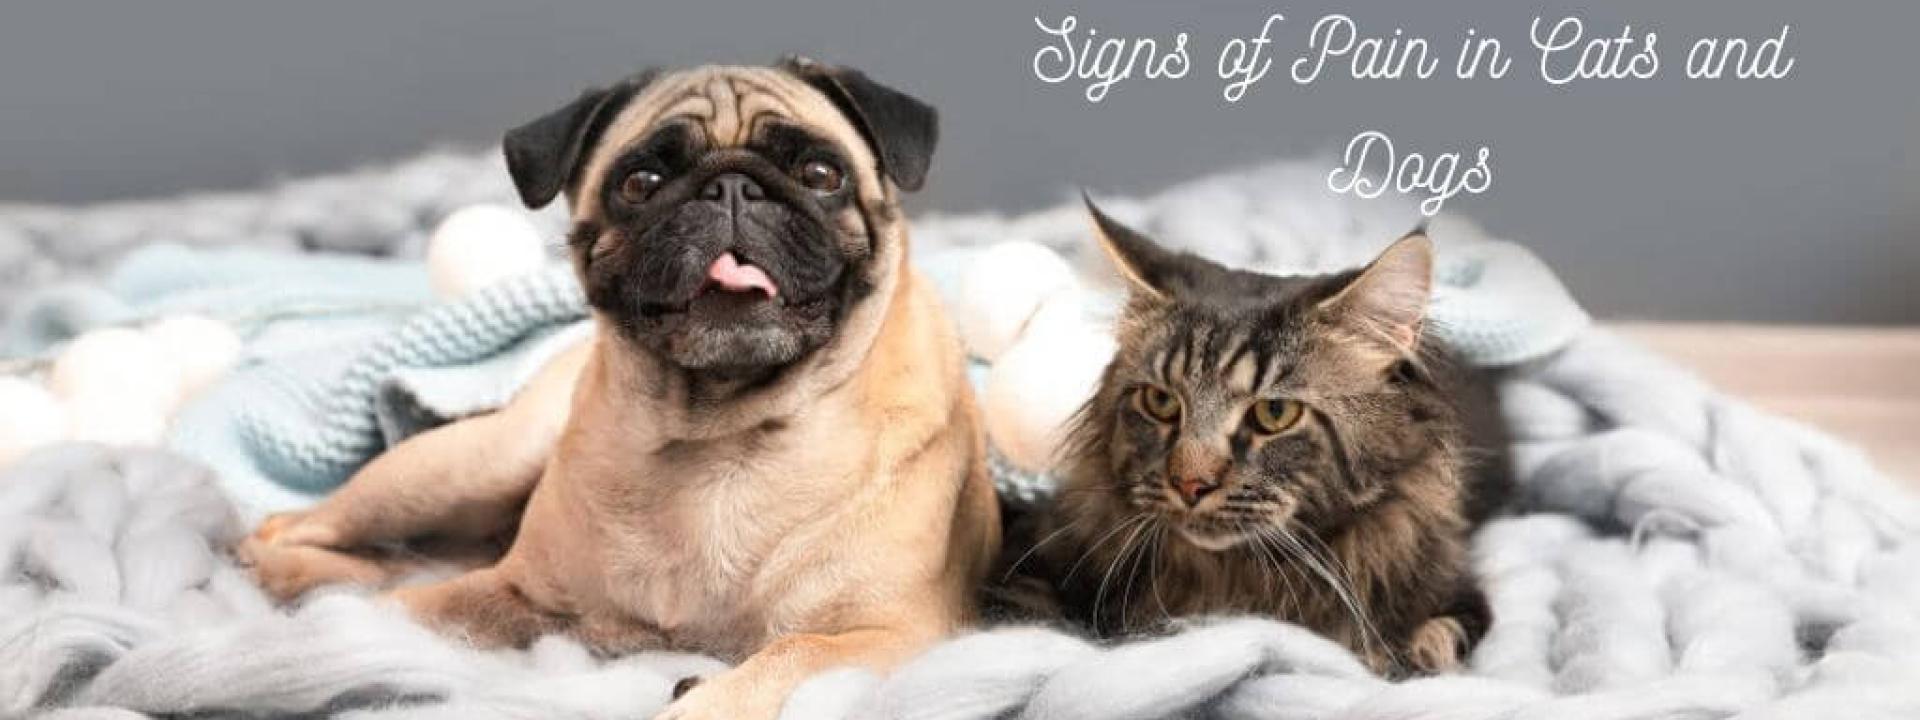 signs-of-pain-in-cats-and-dogs.jpg